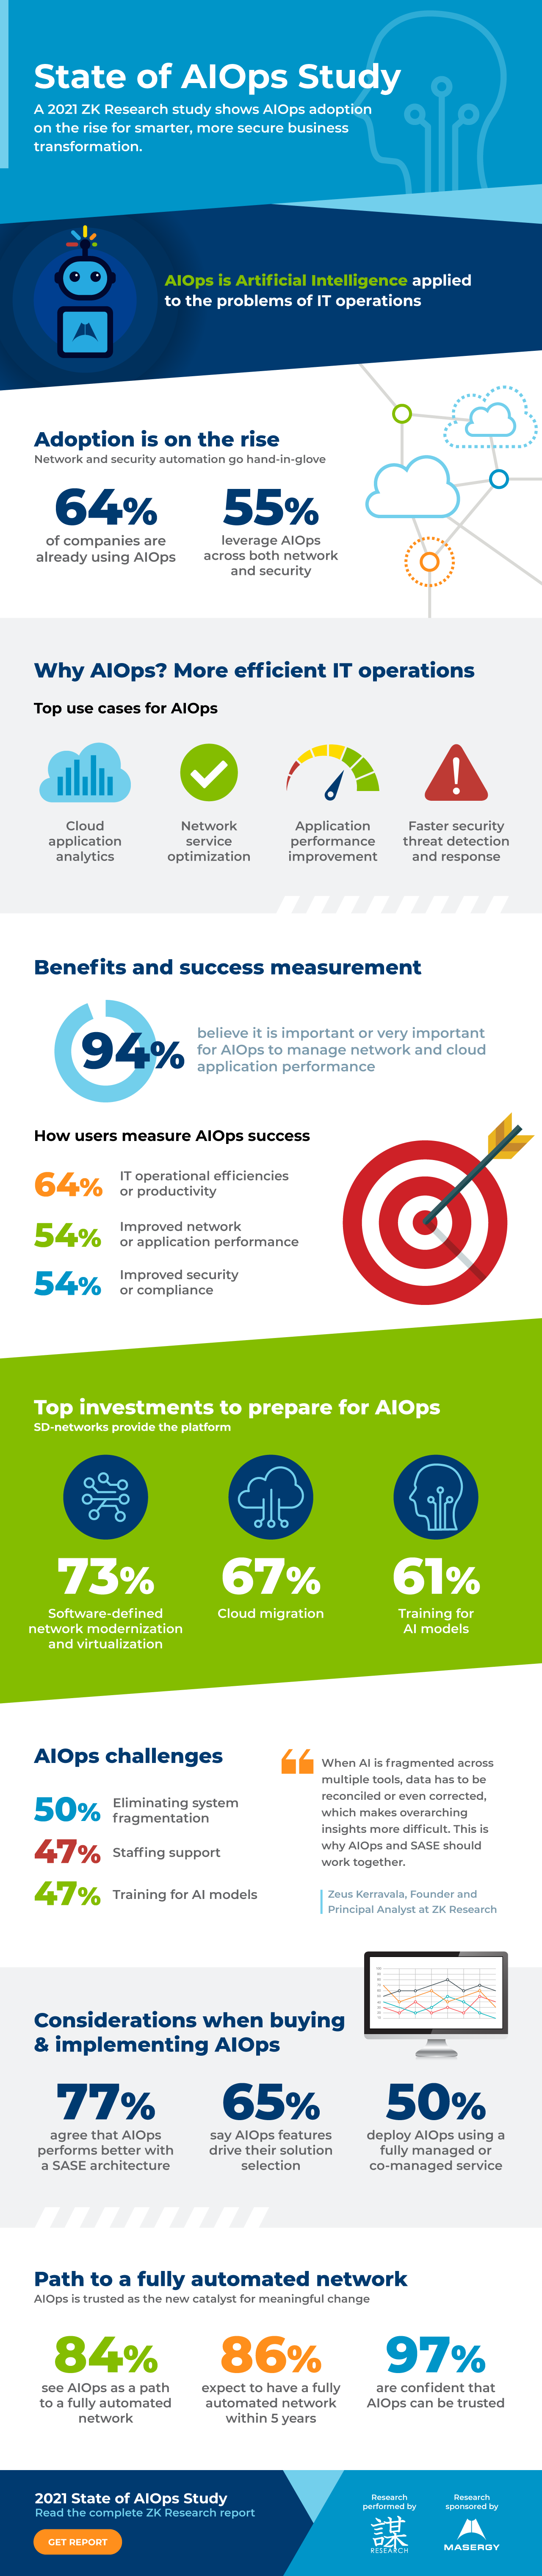 Infographic: State of AIOps Study